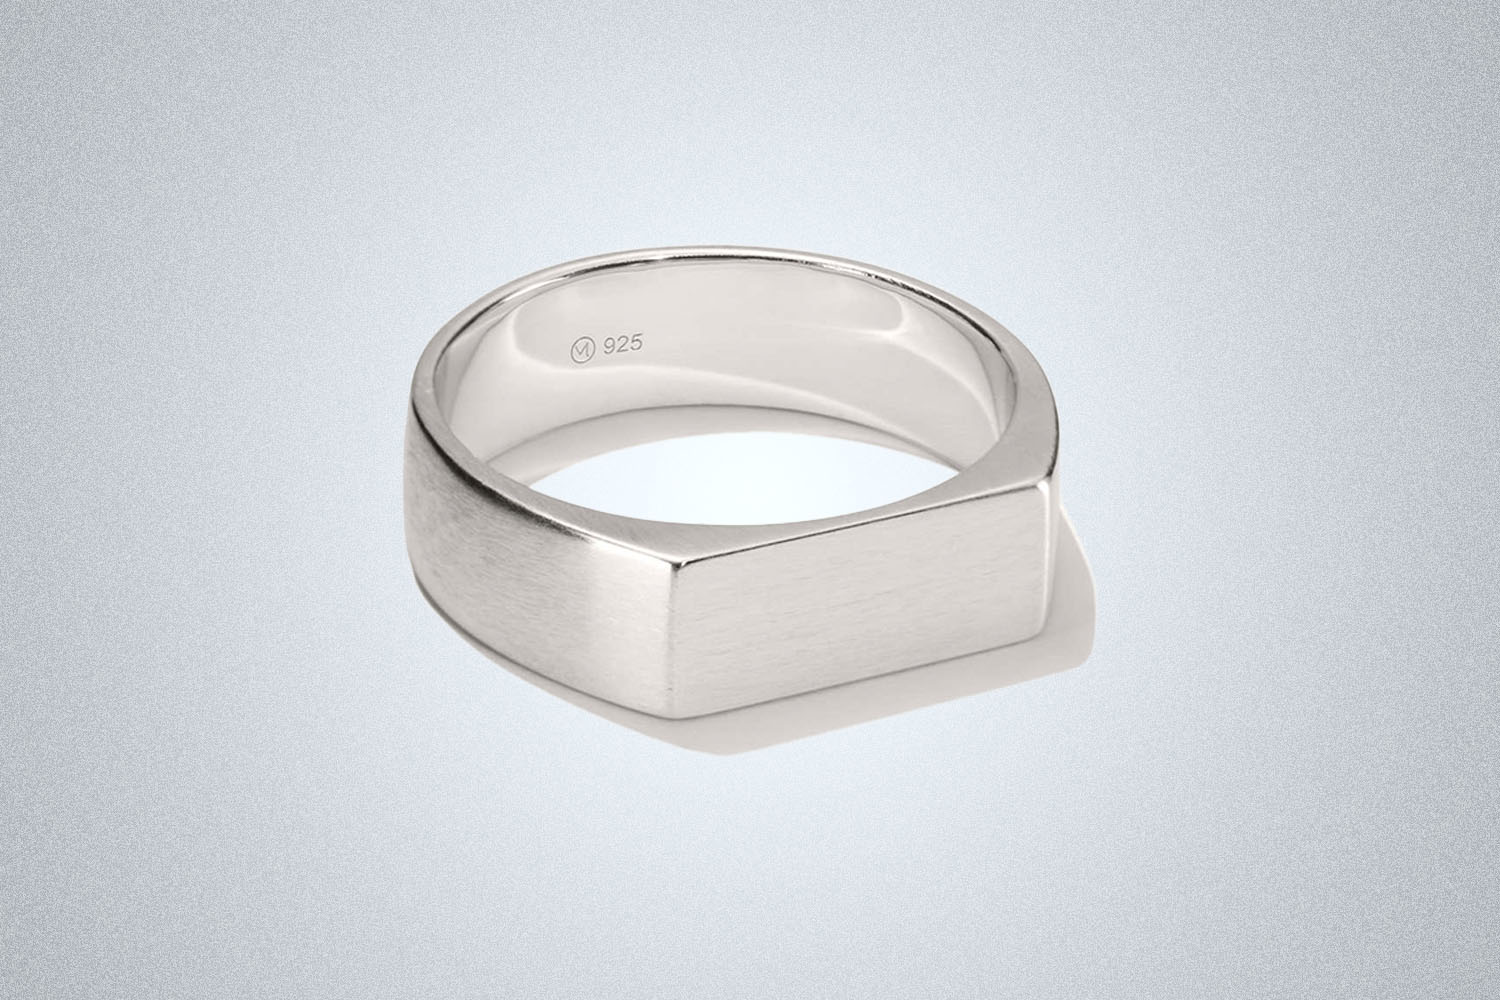 a silver singlet ring from Mejuri on a grey background